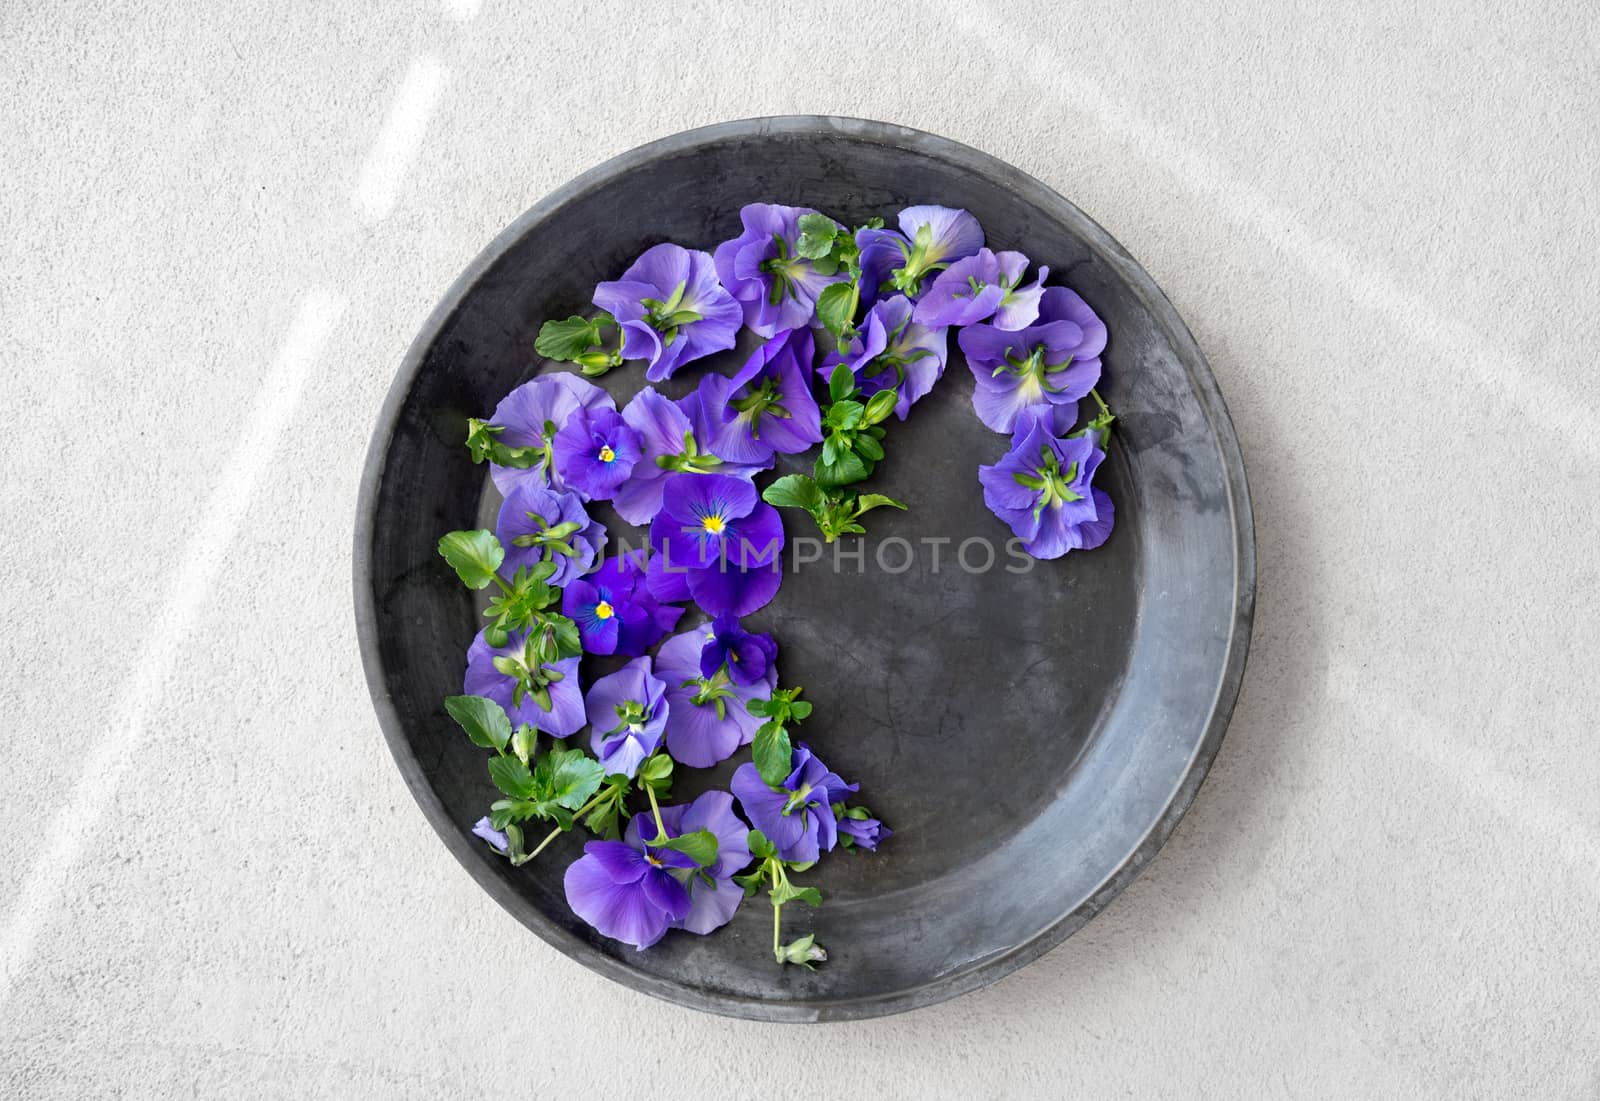 Blue pansies in a metal tray, on gray concrete background.